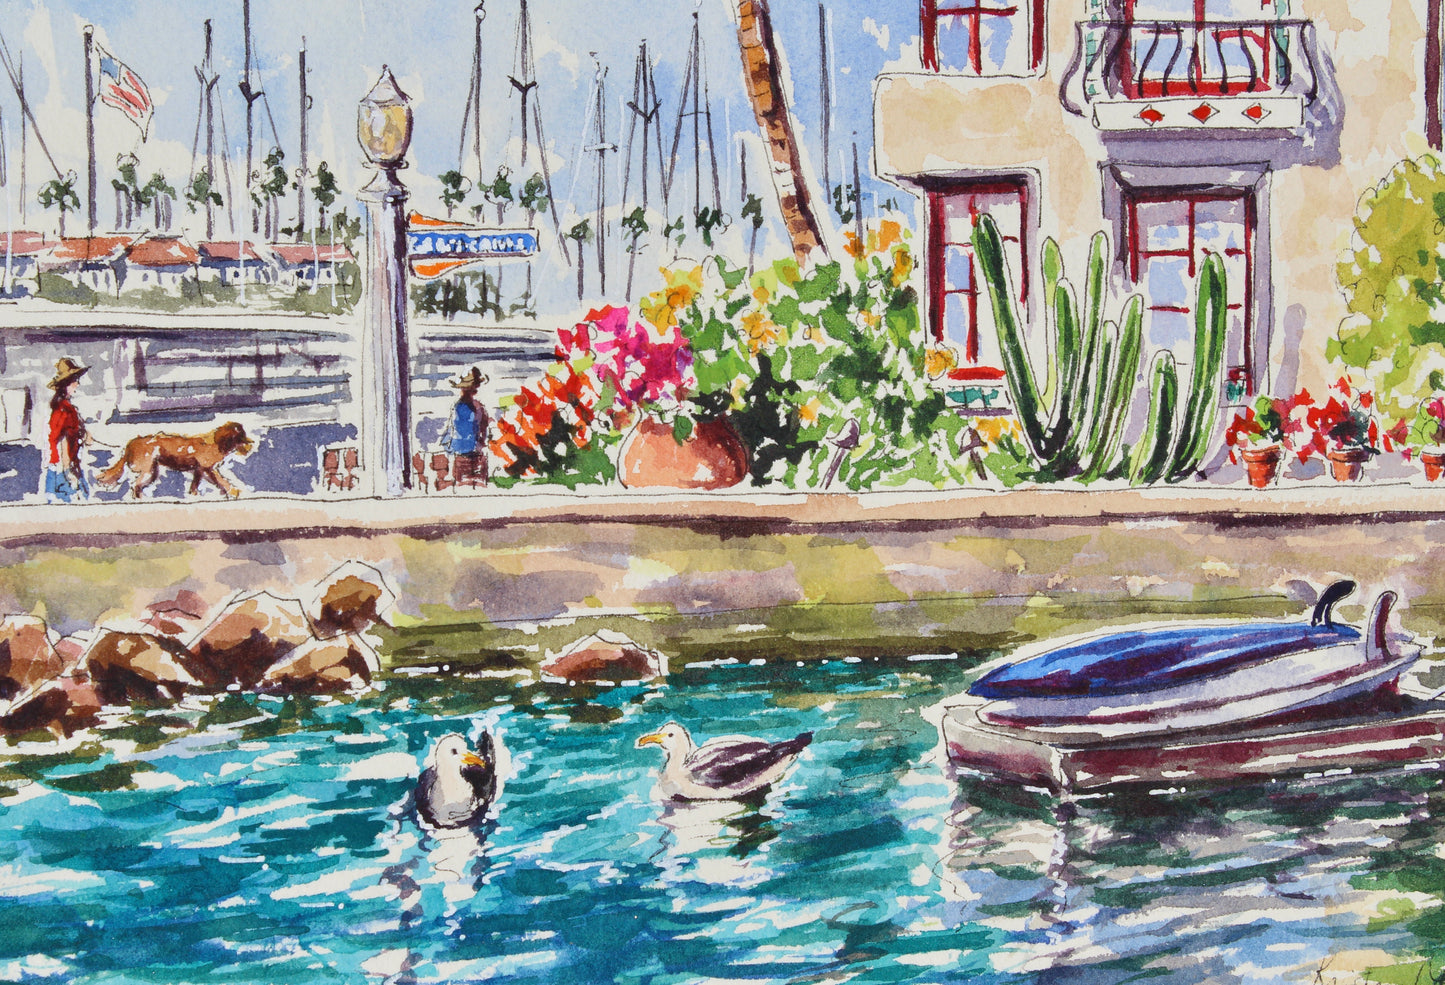 Exploring Balboa Island, An Original 10" x 14" Watercolor And Ink Painting Of Balboa Island With Golden Retrievers And Casa Revilo On South Bayfront